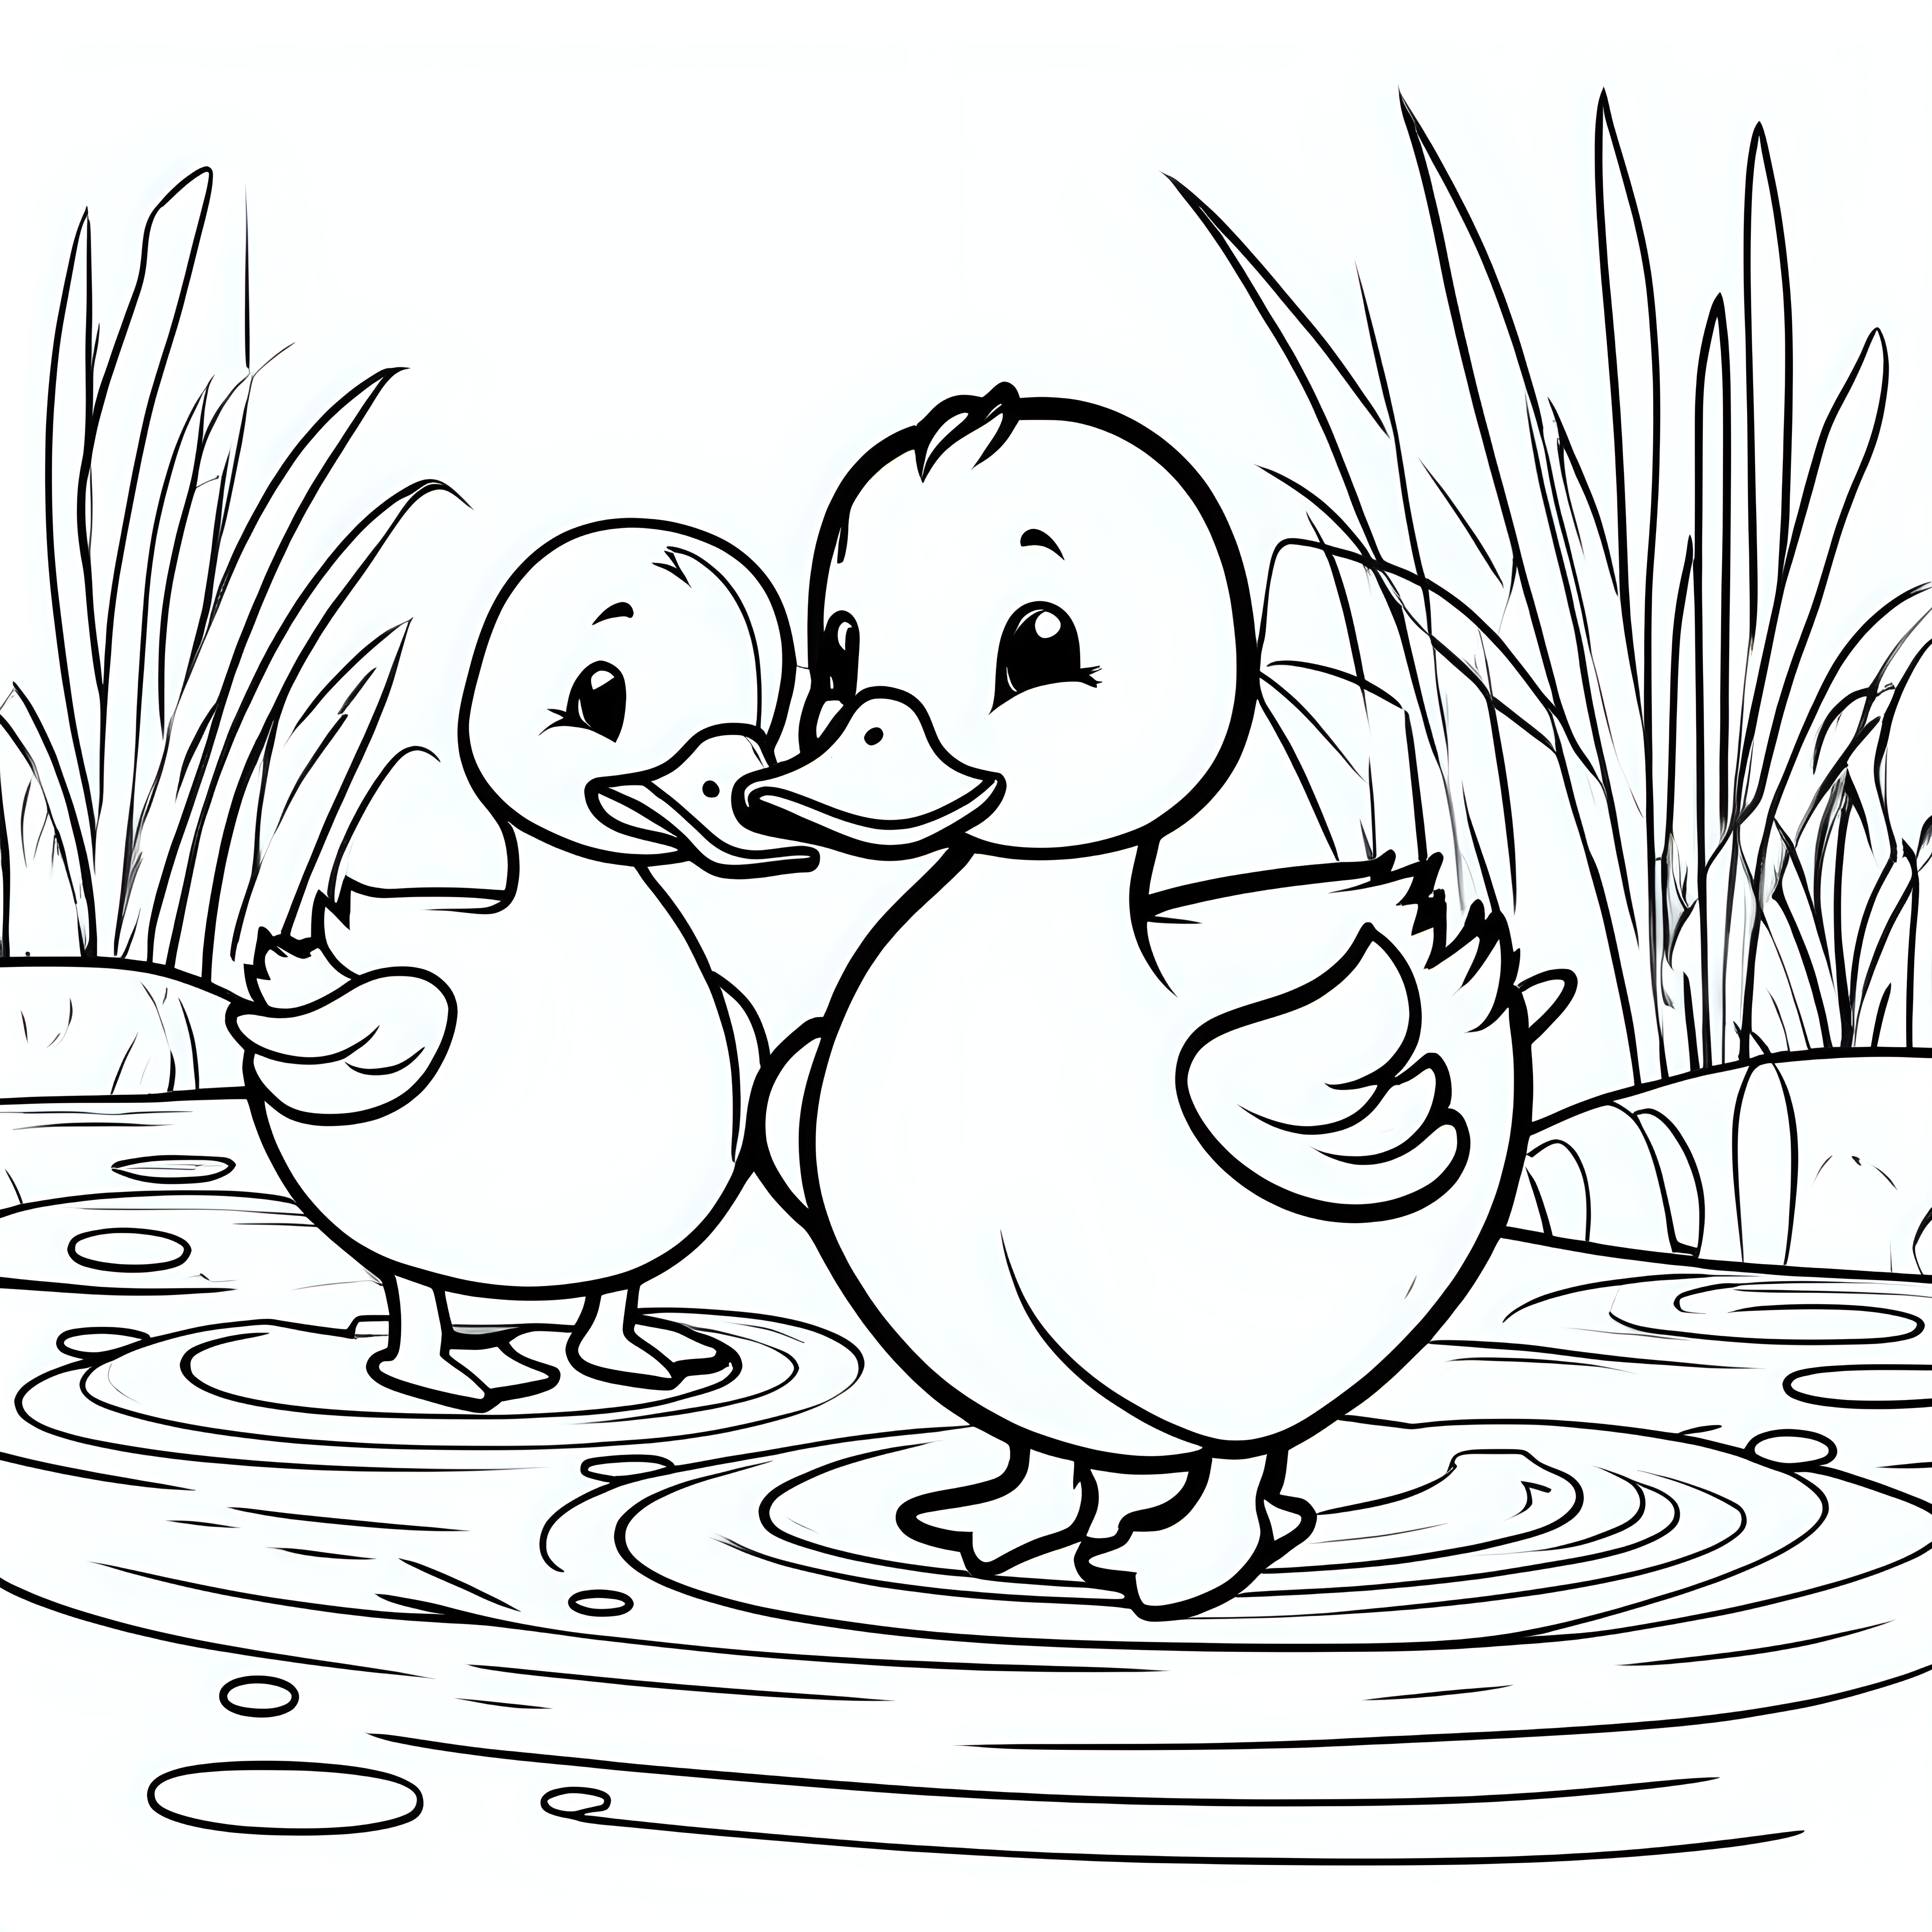 draw a cute ducks with only the outline  for a coloring book